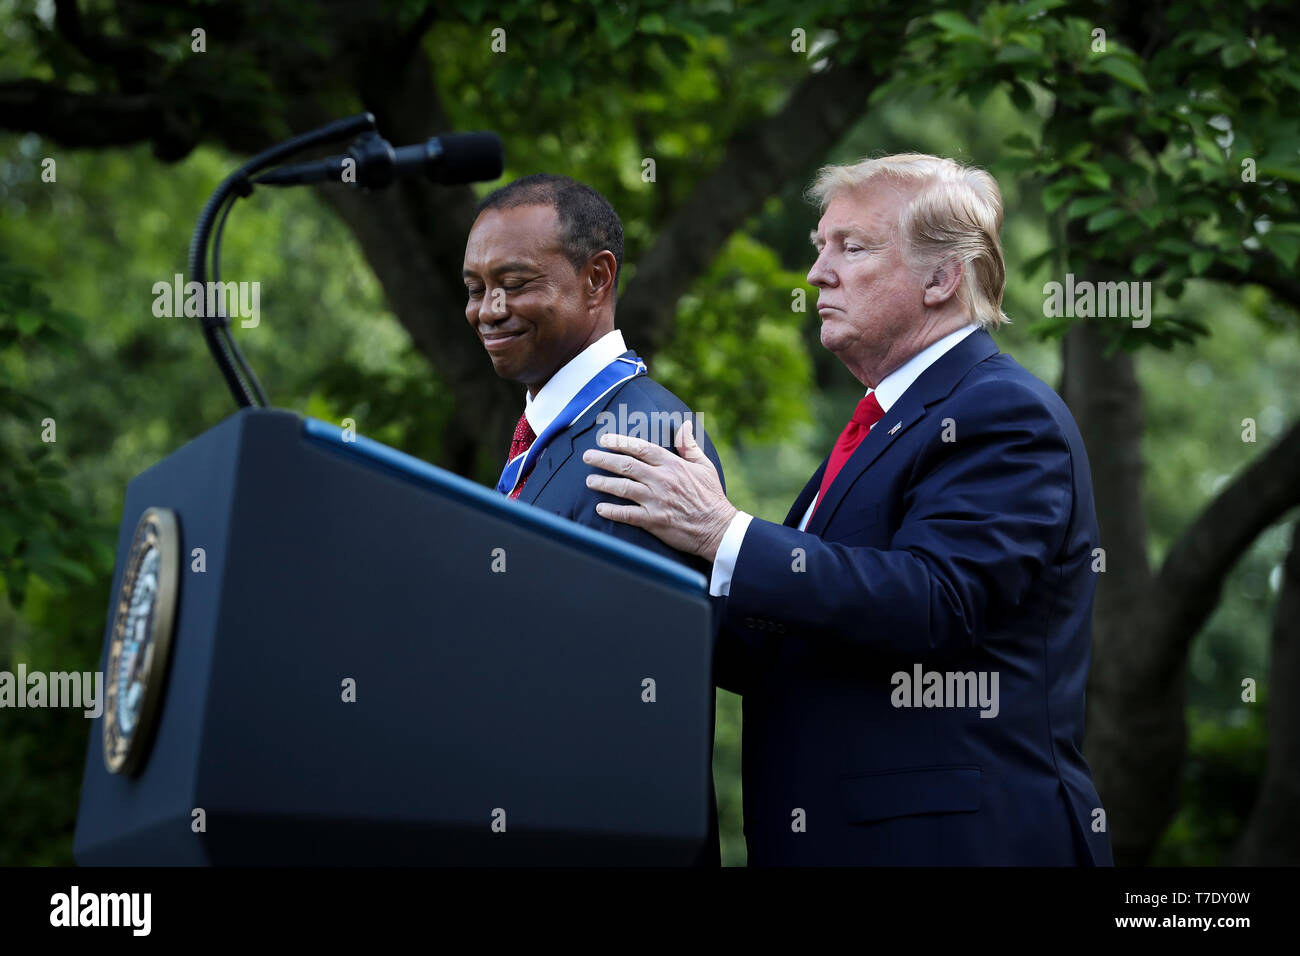 United States President Donald J. Trump presents the Presidential Medal of Freedom to Tiger Woods during a ceremony in the Rose Garden of the White House on May 6, 2019 in Washington, DC. Credit: Oliver Contreras/Pool via CNP /MediaPunch Stock Photo